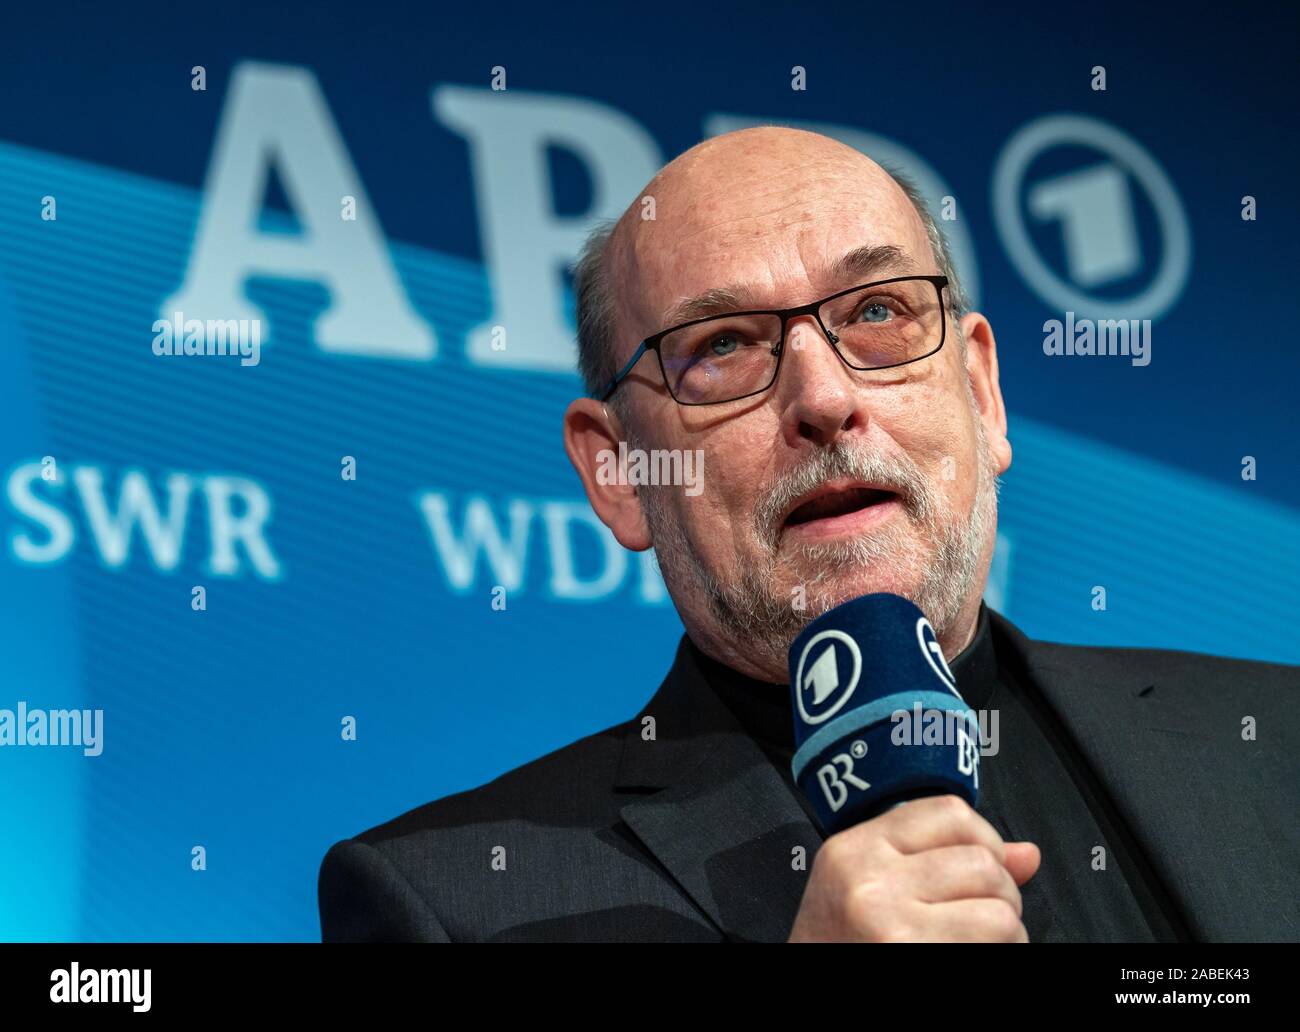 Munich, Germany. 27th Nov, 2019. Lorenz Wolf, Chairman of the Broadcasting Council of Bayerischer Rundfunk and Chairman of the ARD (GVK) Conference of Committee Chairmen, takes part in the ARD press conference at the BR-Funkhaus. On 25 and 26 November 2019, a meeting and general meeting of the ARD directors and the committee chairmen took place. It was the final ARD meeting during the two-year presidency of Bayerischer Rundfunk, which ends at the end of December 2019. Credit: Peter Kneffel/dpa/Alamy Live News Stock Photo